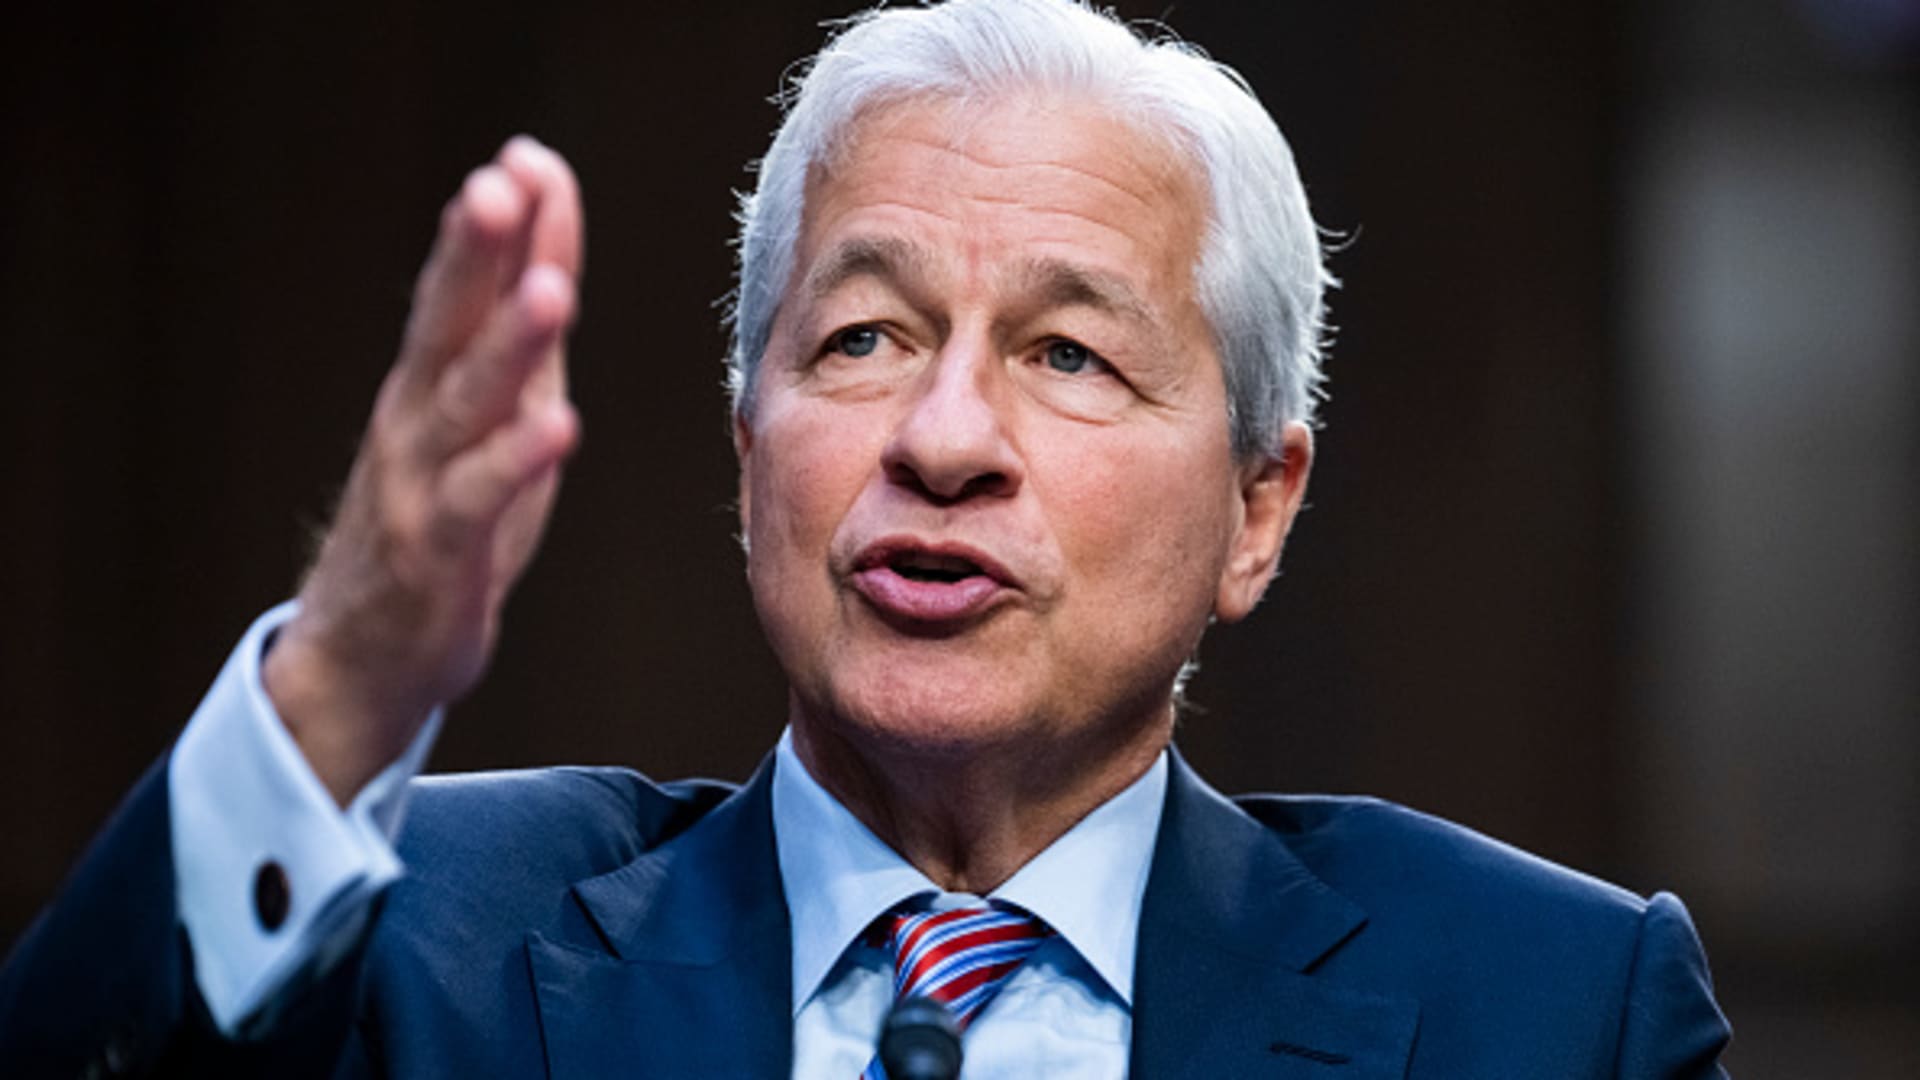 JPMorgan Chase is set to report third-quarter earnings  heres what the Street expects